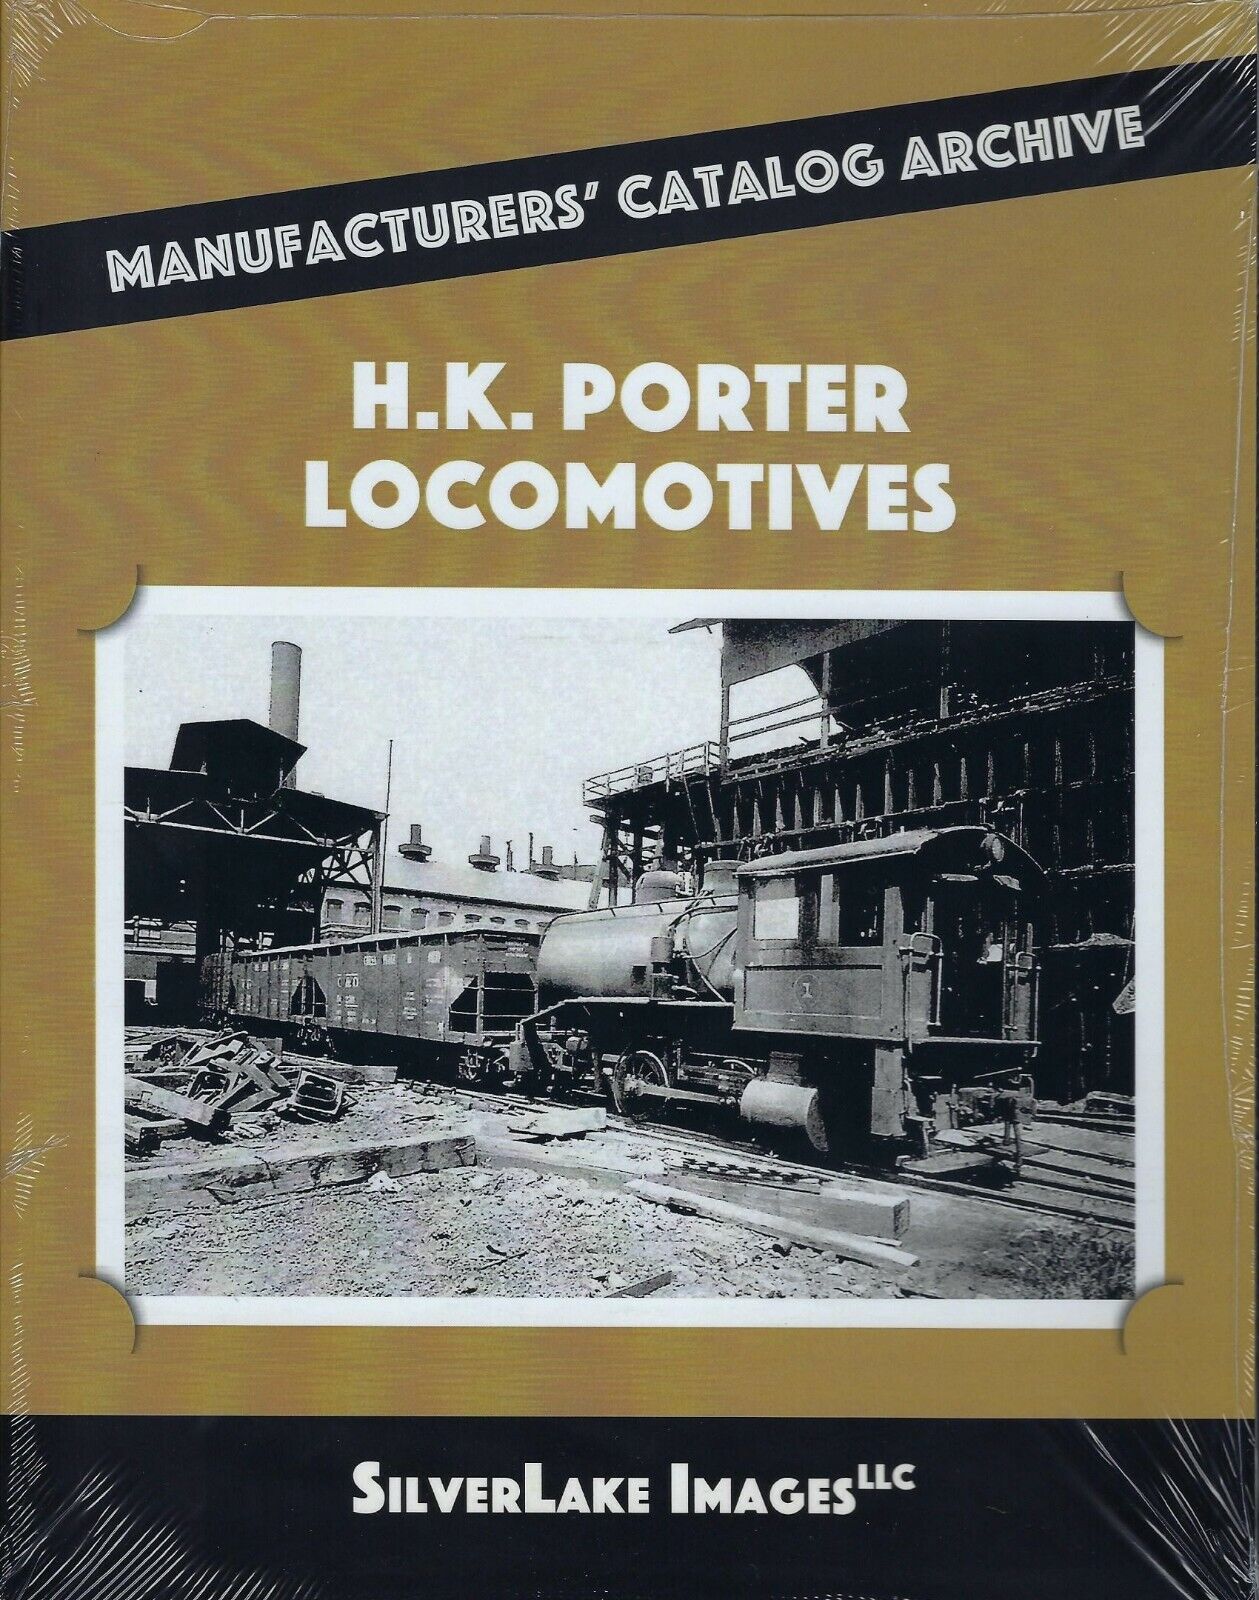 H.K. PORTER LOCOMOTIVES from Manufacturers\' Catalog Archive - (NEW BOOK)